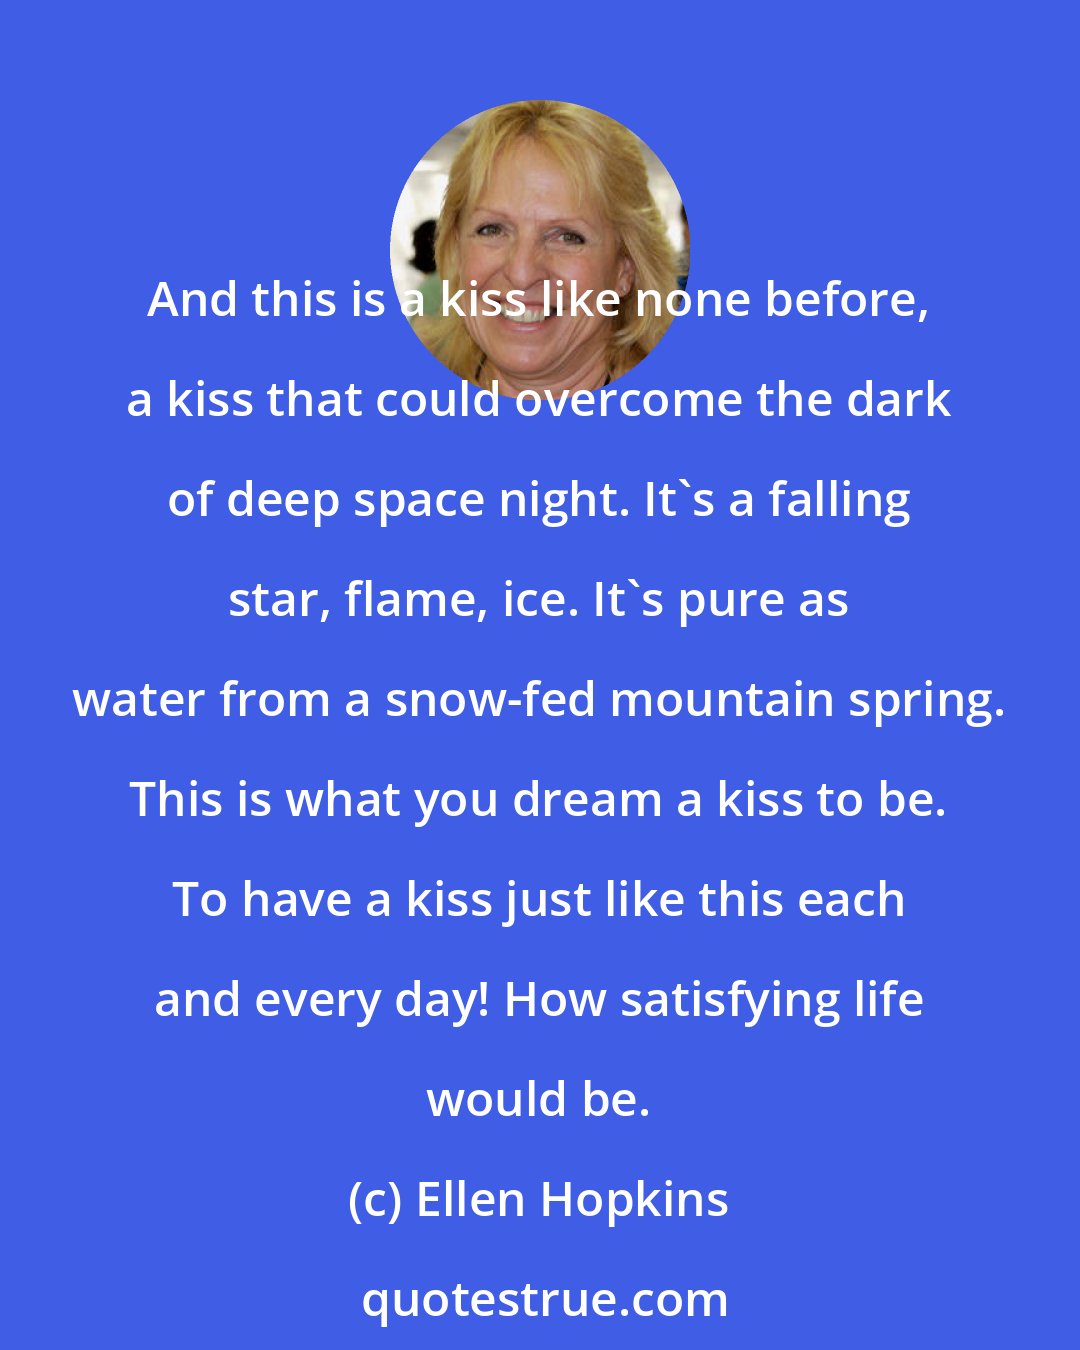 Ellen Hopkins: And this is a kiss like none before, a kiss that could overcome the dark of deep space night. It's a falling star, flame, ice. It's pure as water from a snow-fed mountain spring. This is what you dream a kiss to be. To have a kiss just like this each and every day! How satisfying life would be.